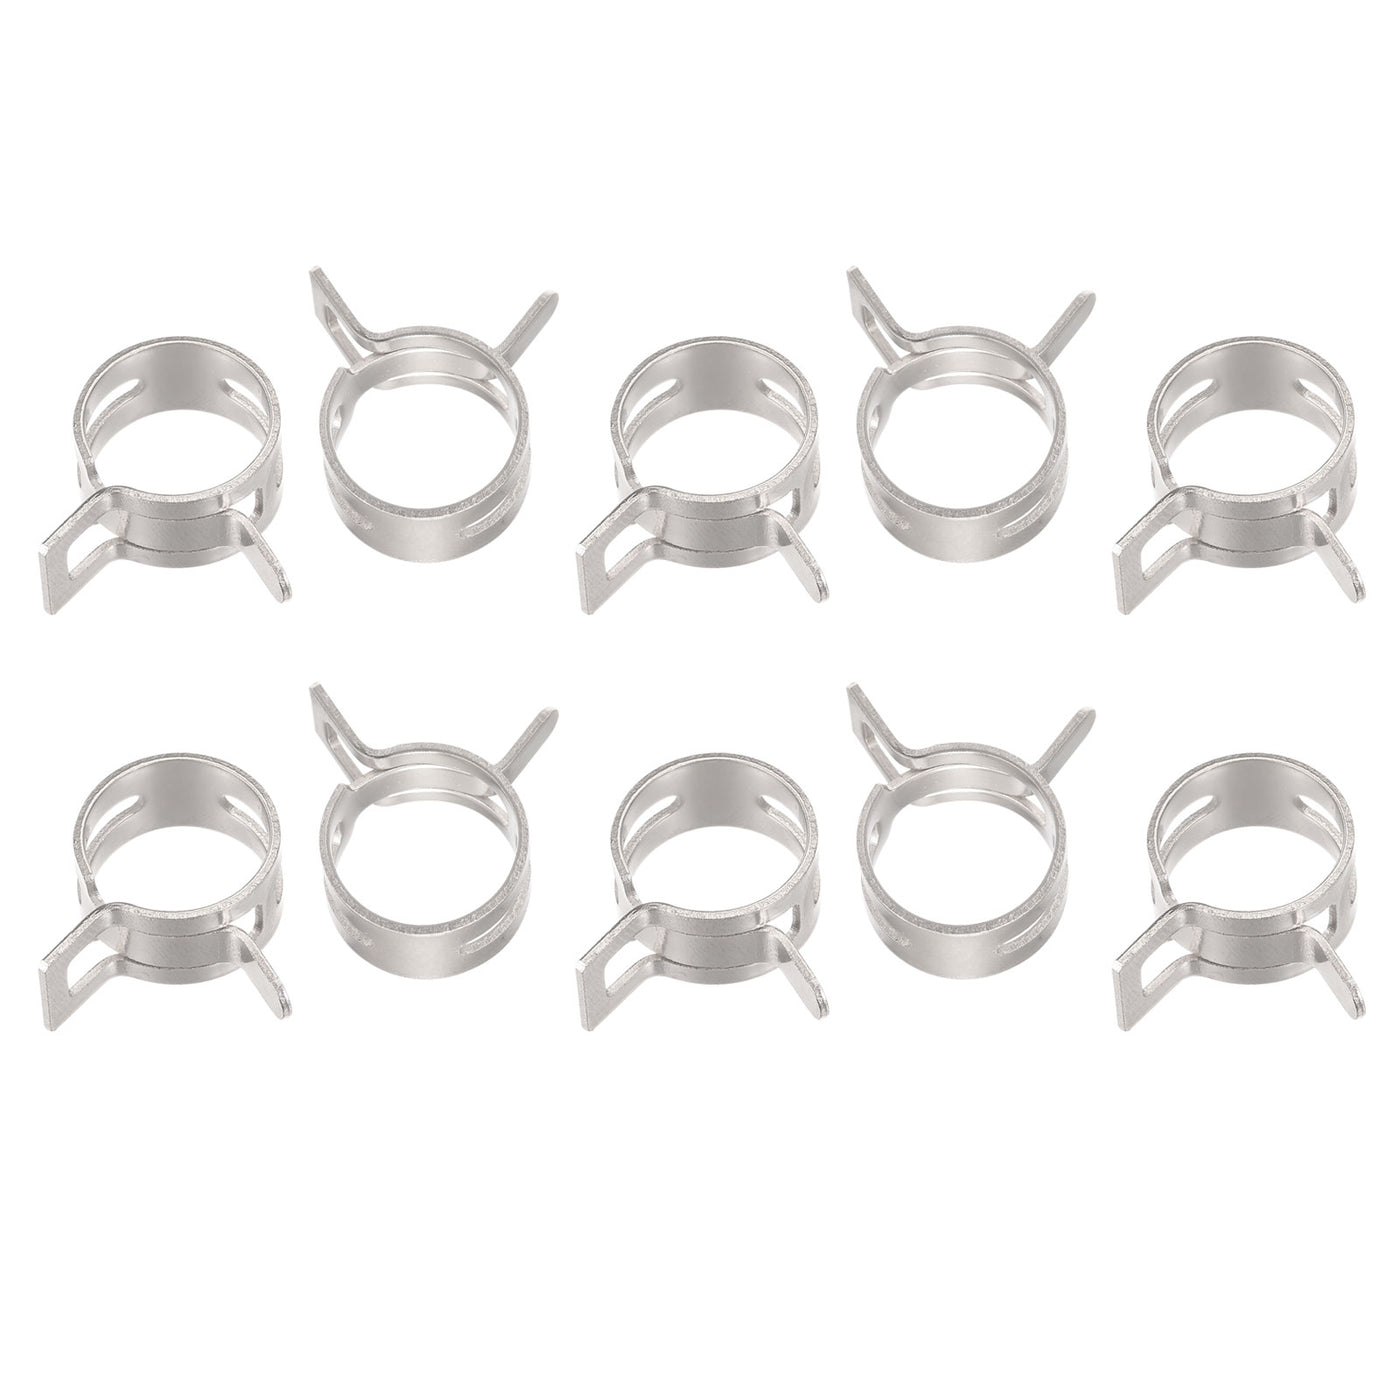 Uxcell Uxcell Spring Hose Clamp, 10pcs 65Mn Steel 13mm Low Pressure Air Clip, Nickel Plated